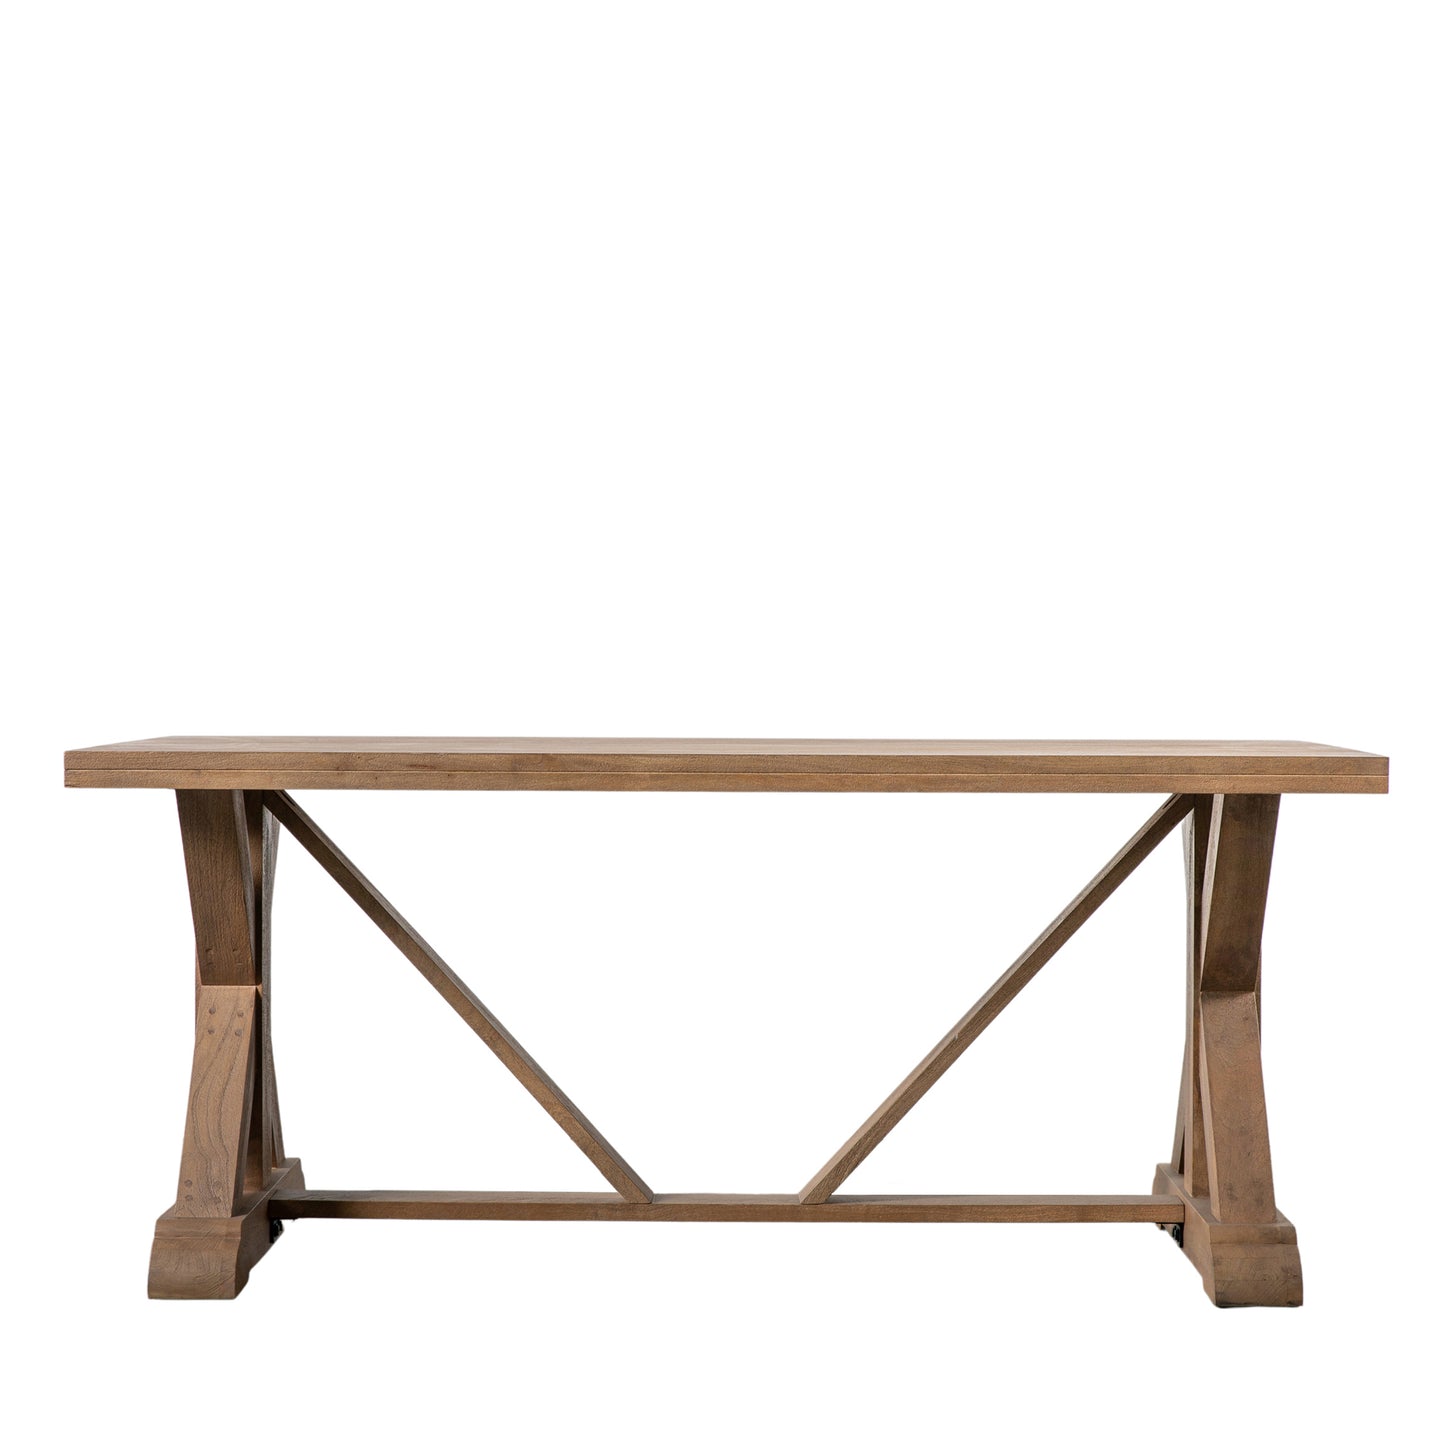 An Ashbourne Dining Table 1800x900x760mm with a wooden top, perfect for interior decor.